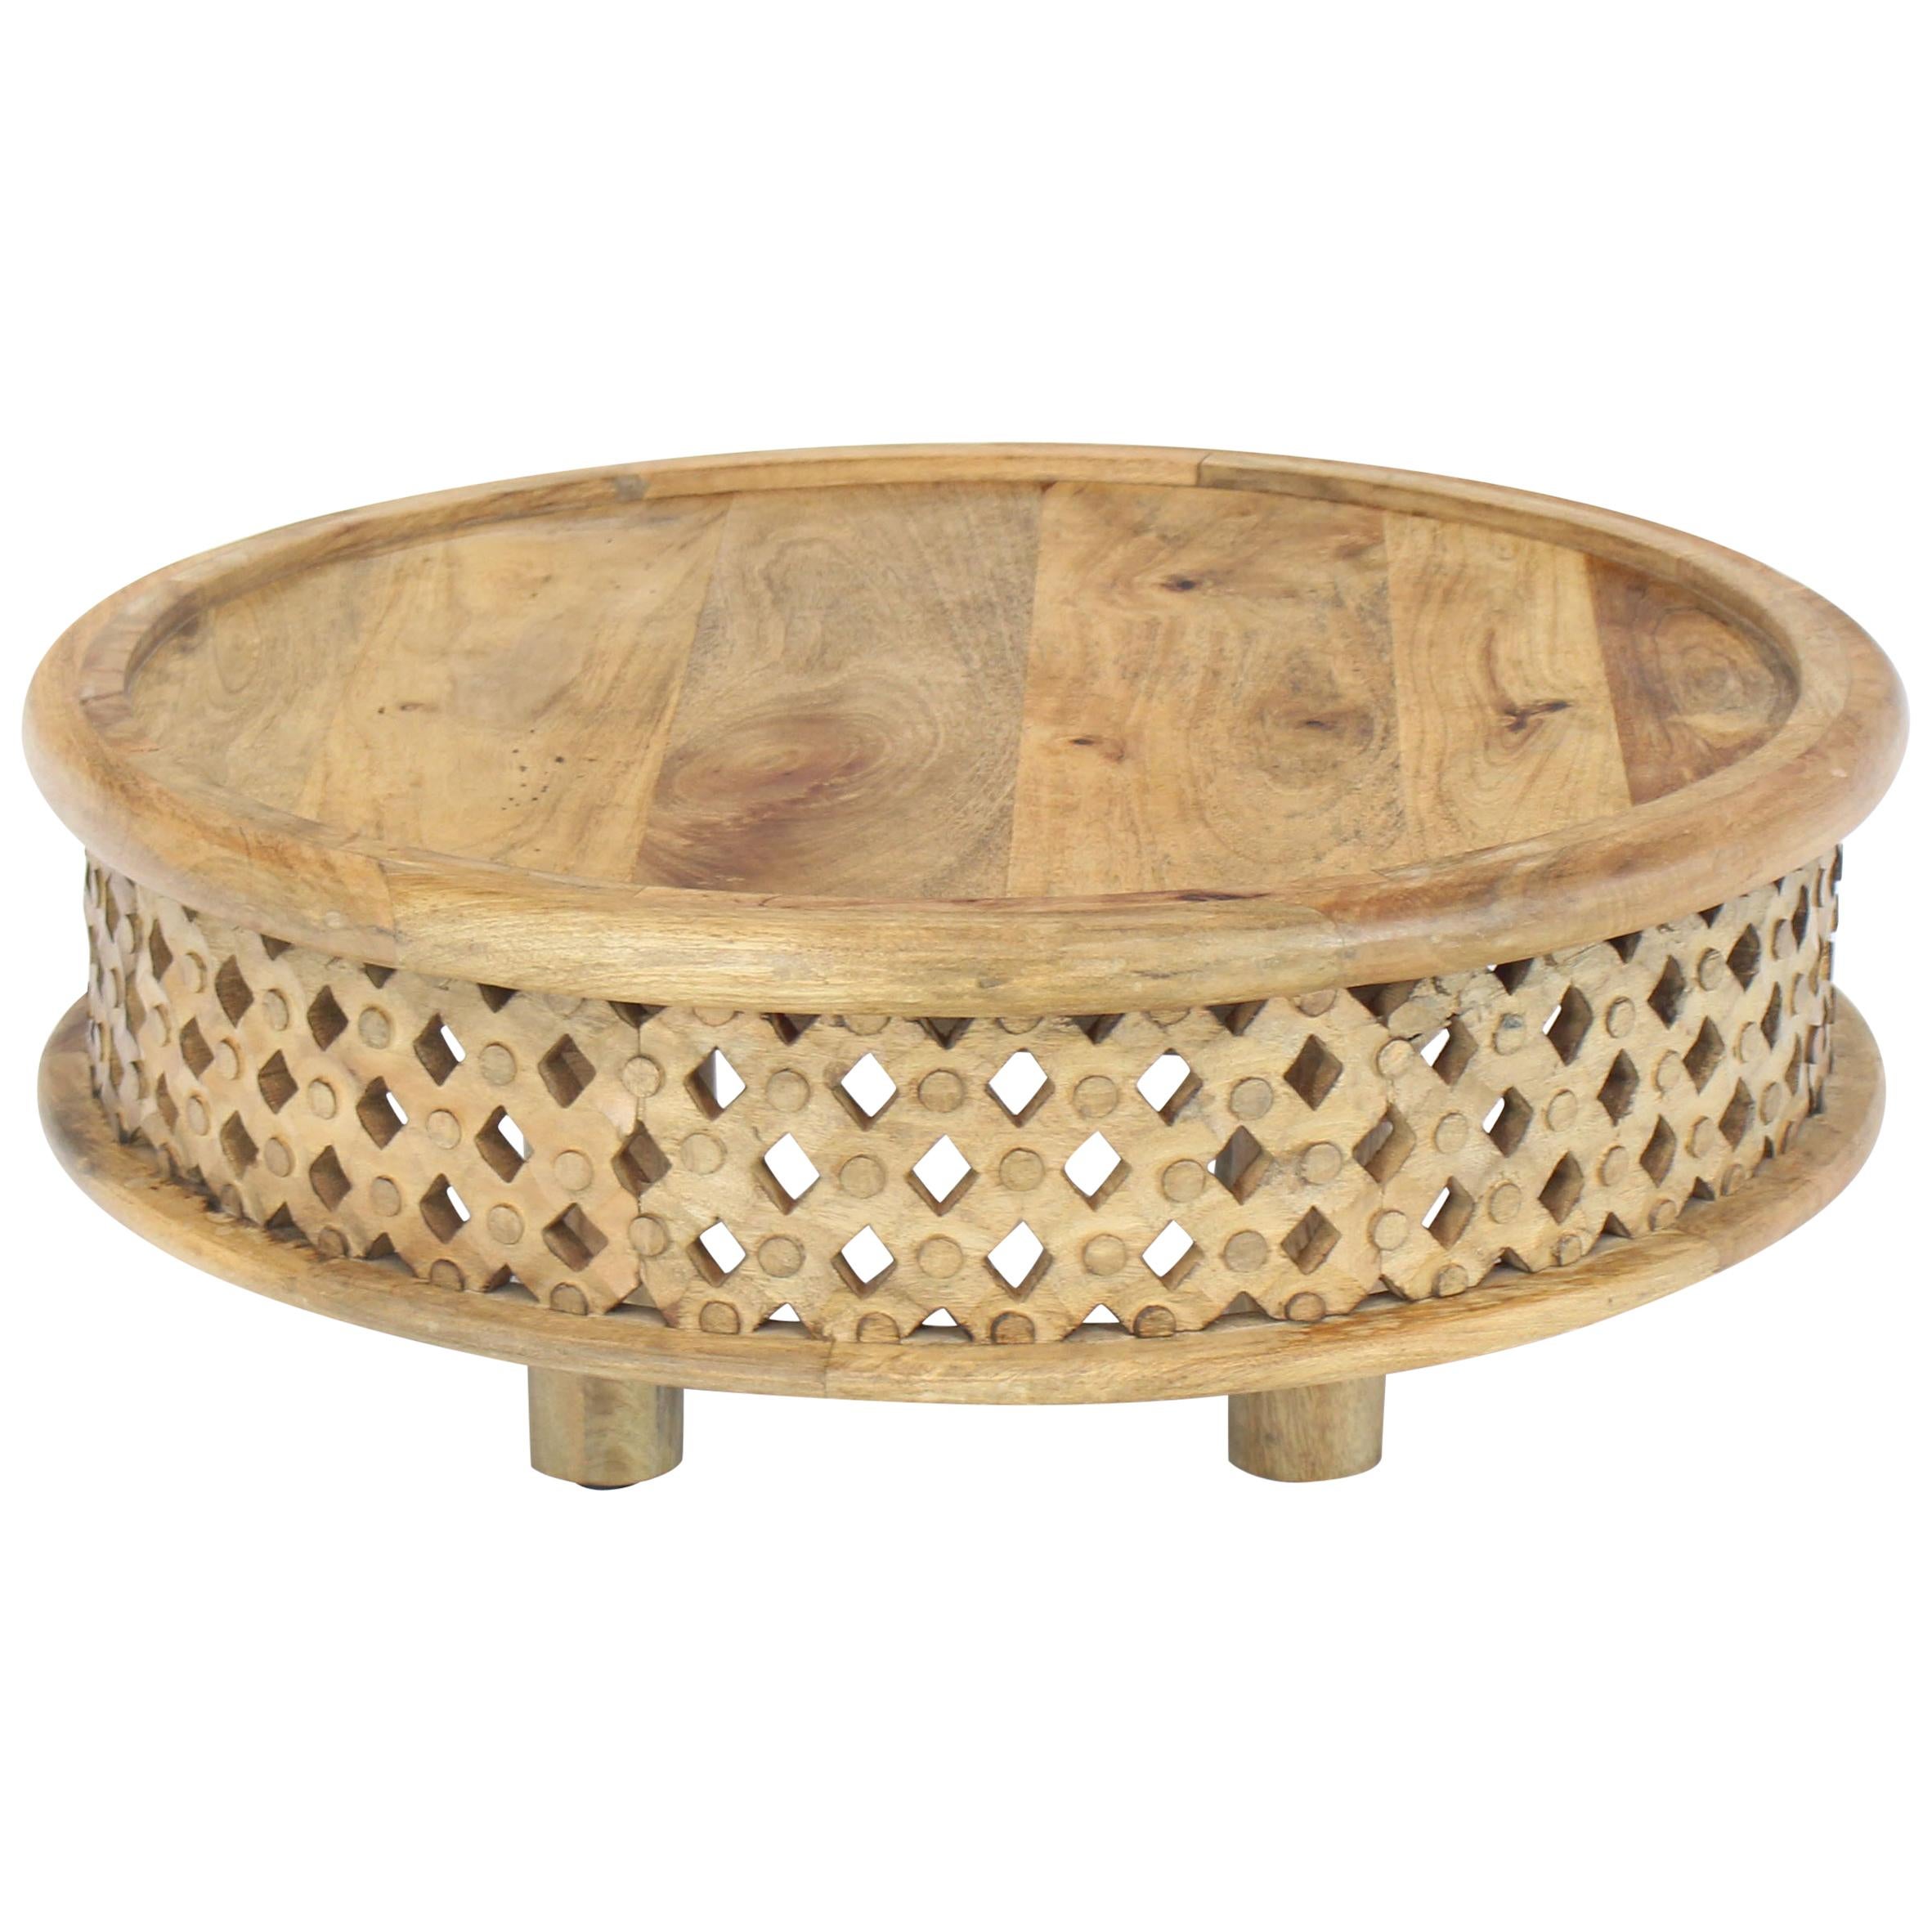 Round Solid Teak Pierced Carving Coffee Table Stand 